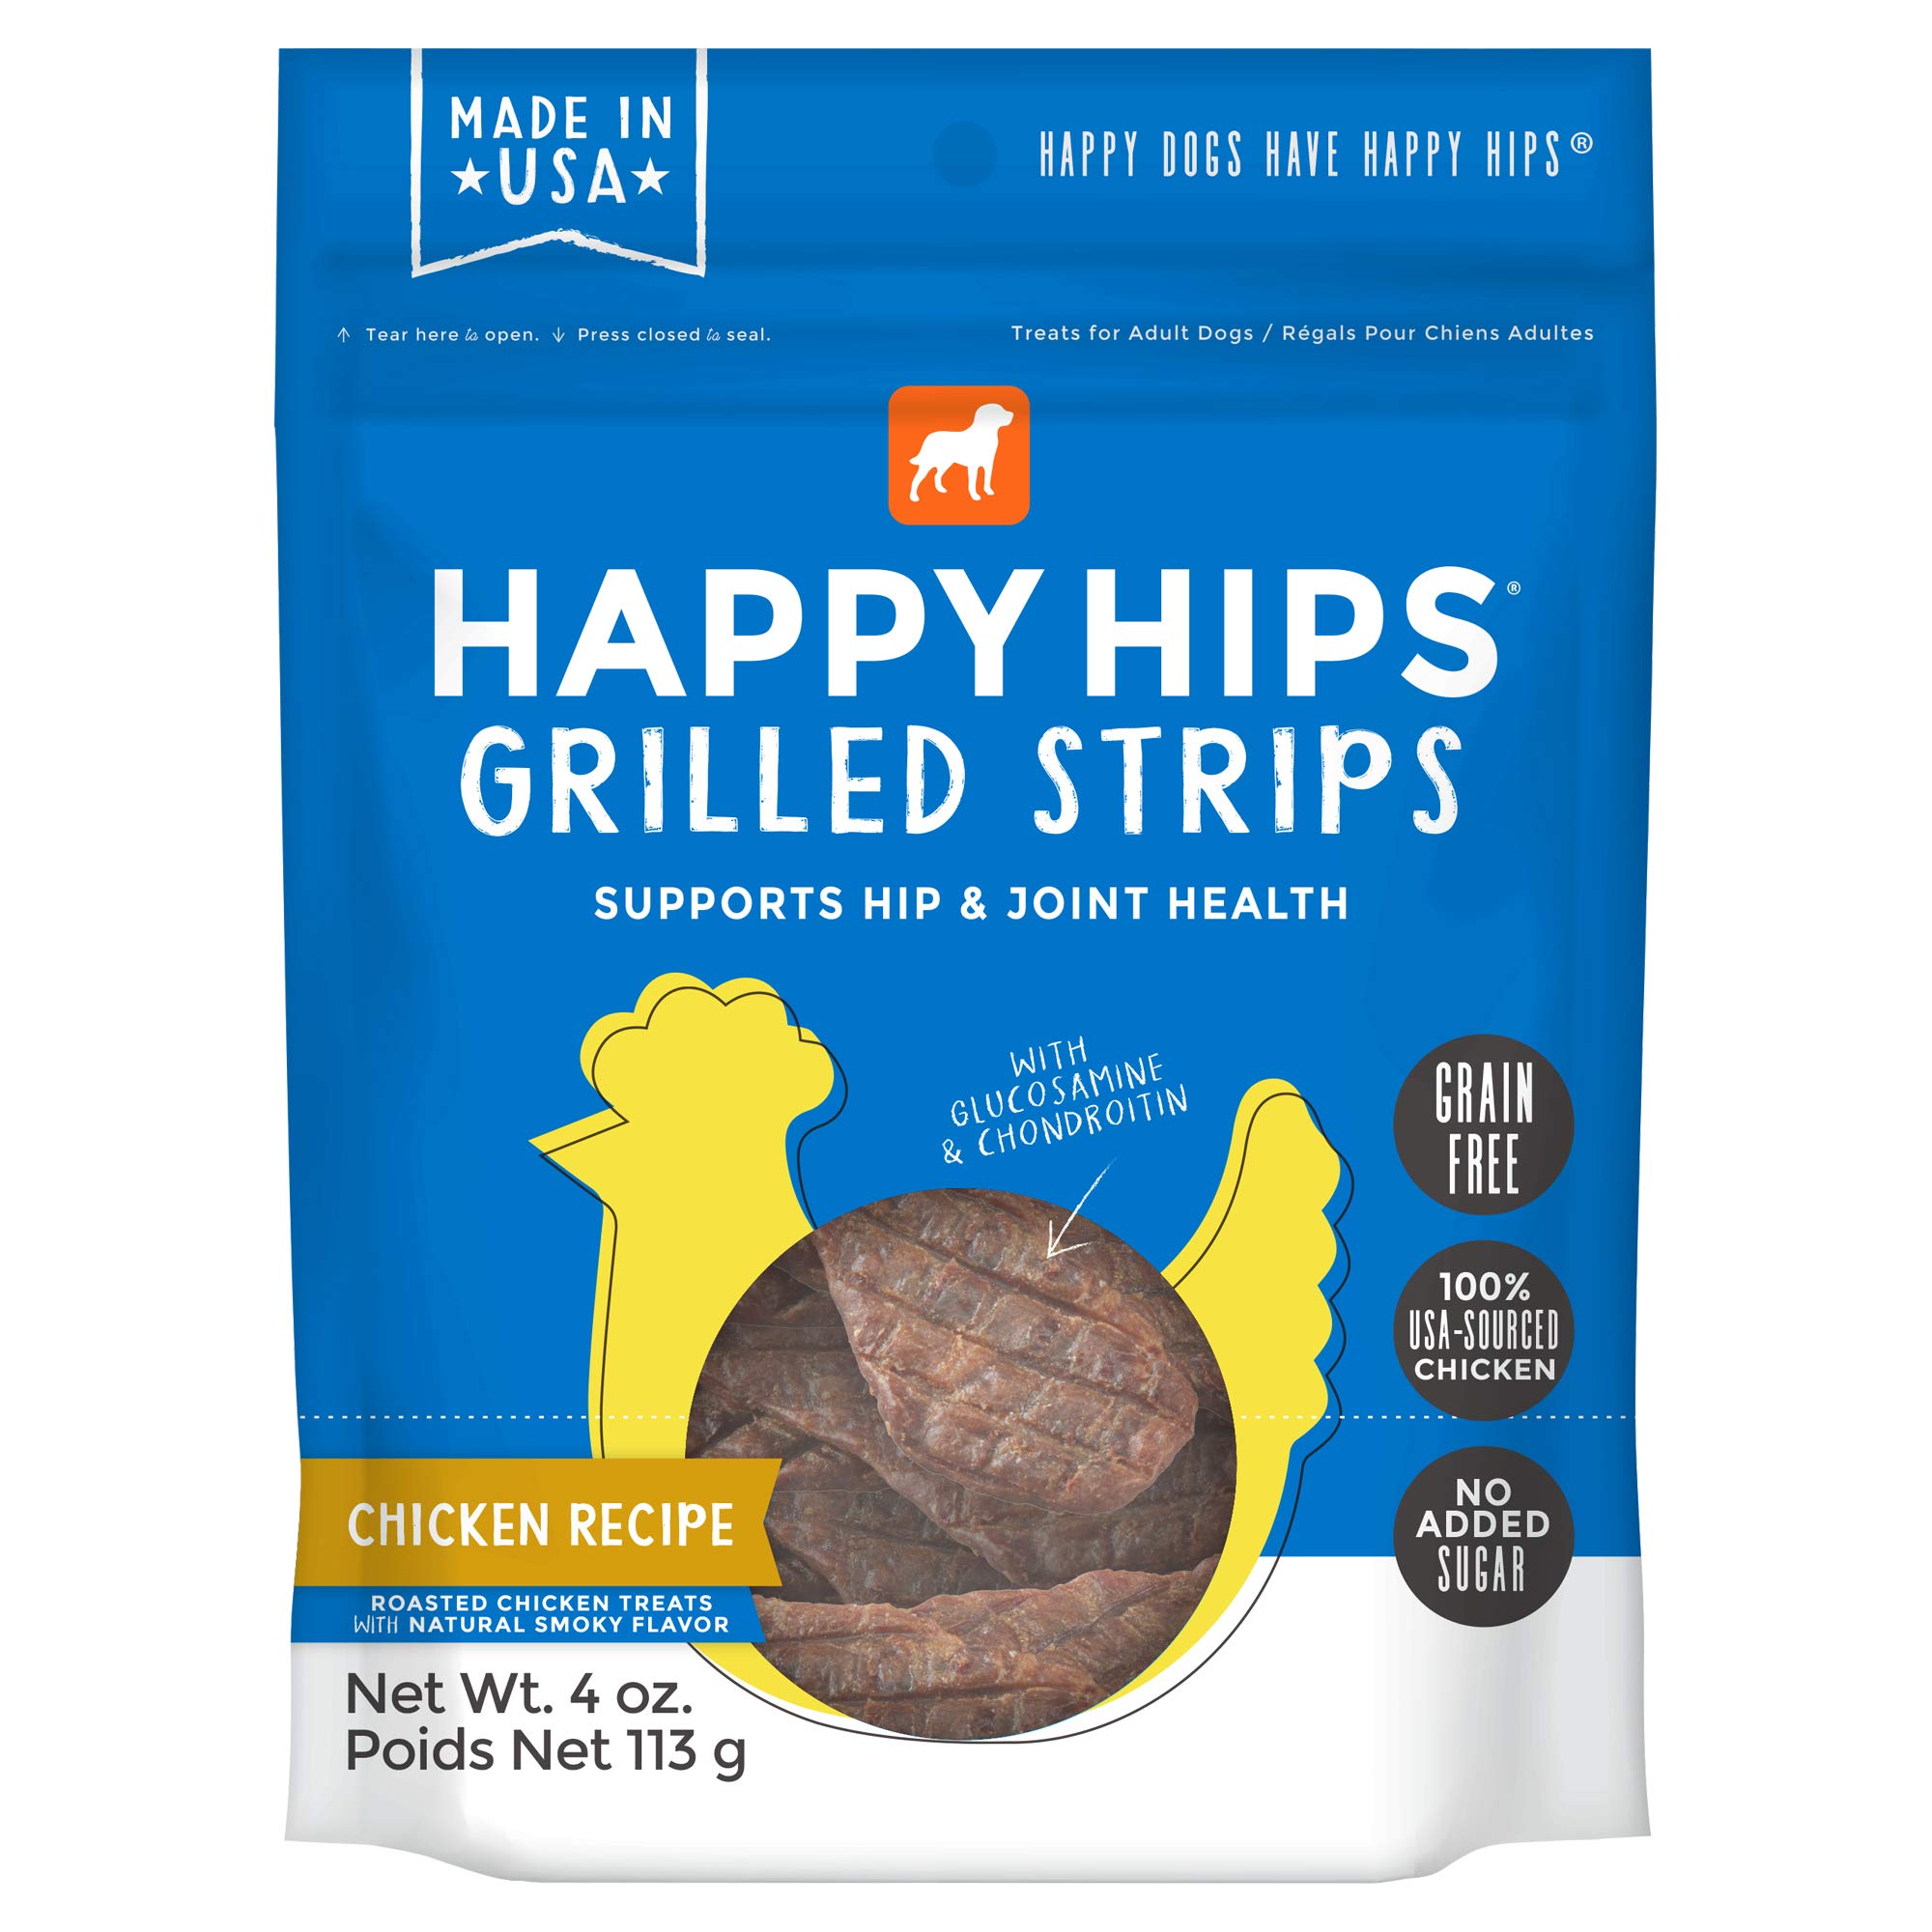 Happy Hips 29268 Joint, Grilled Strips, Grain Free Dog Treats, Glucosamine Chondroitin, Chicken 4Oz